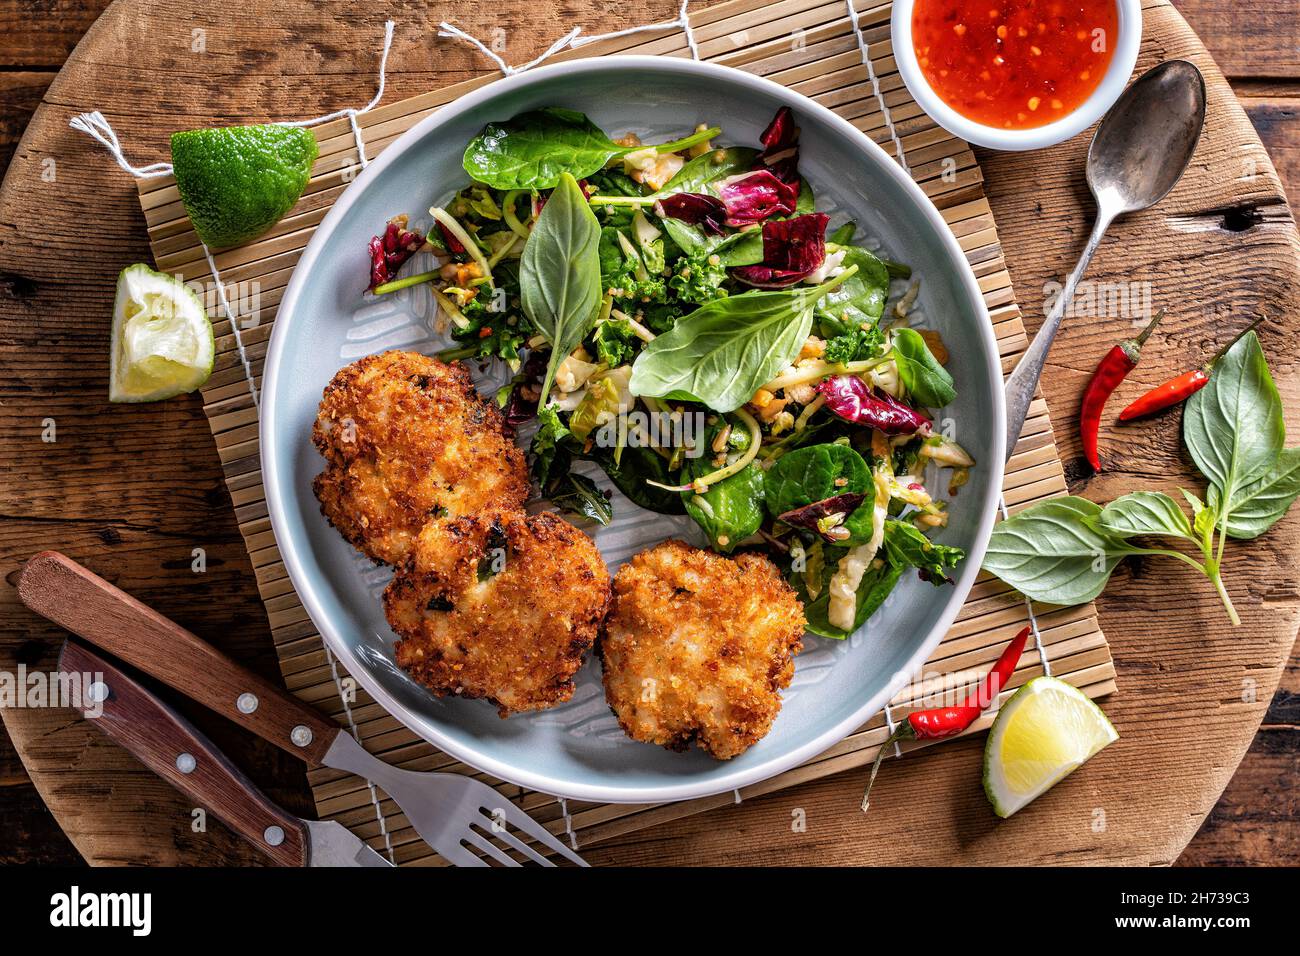 Delicious Thai fish cakes with asian salad and sweet chili sauce on a rustic wood table top. Stock Photo